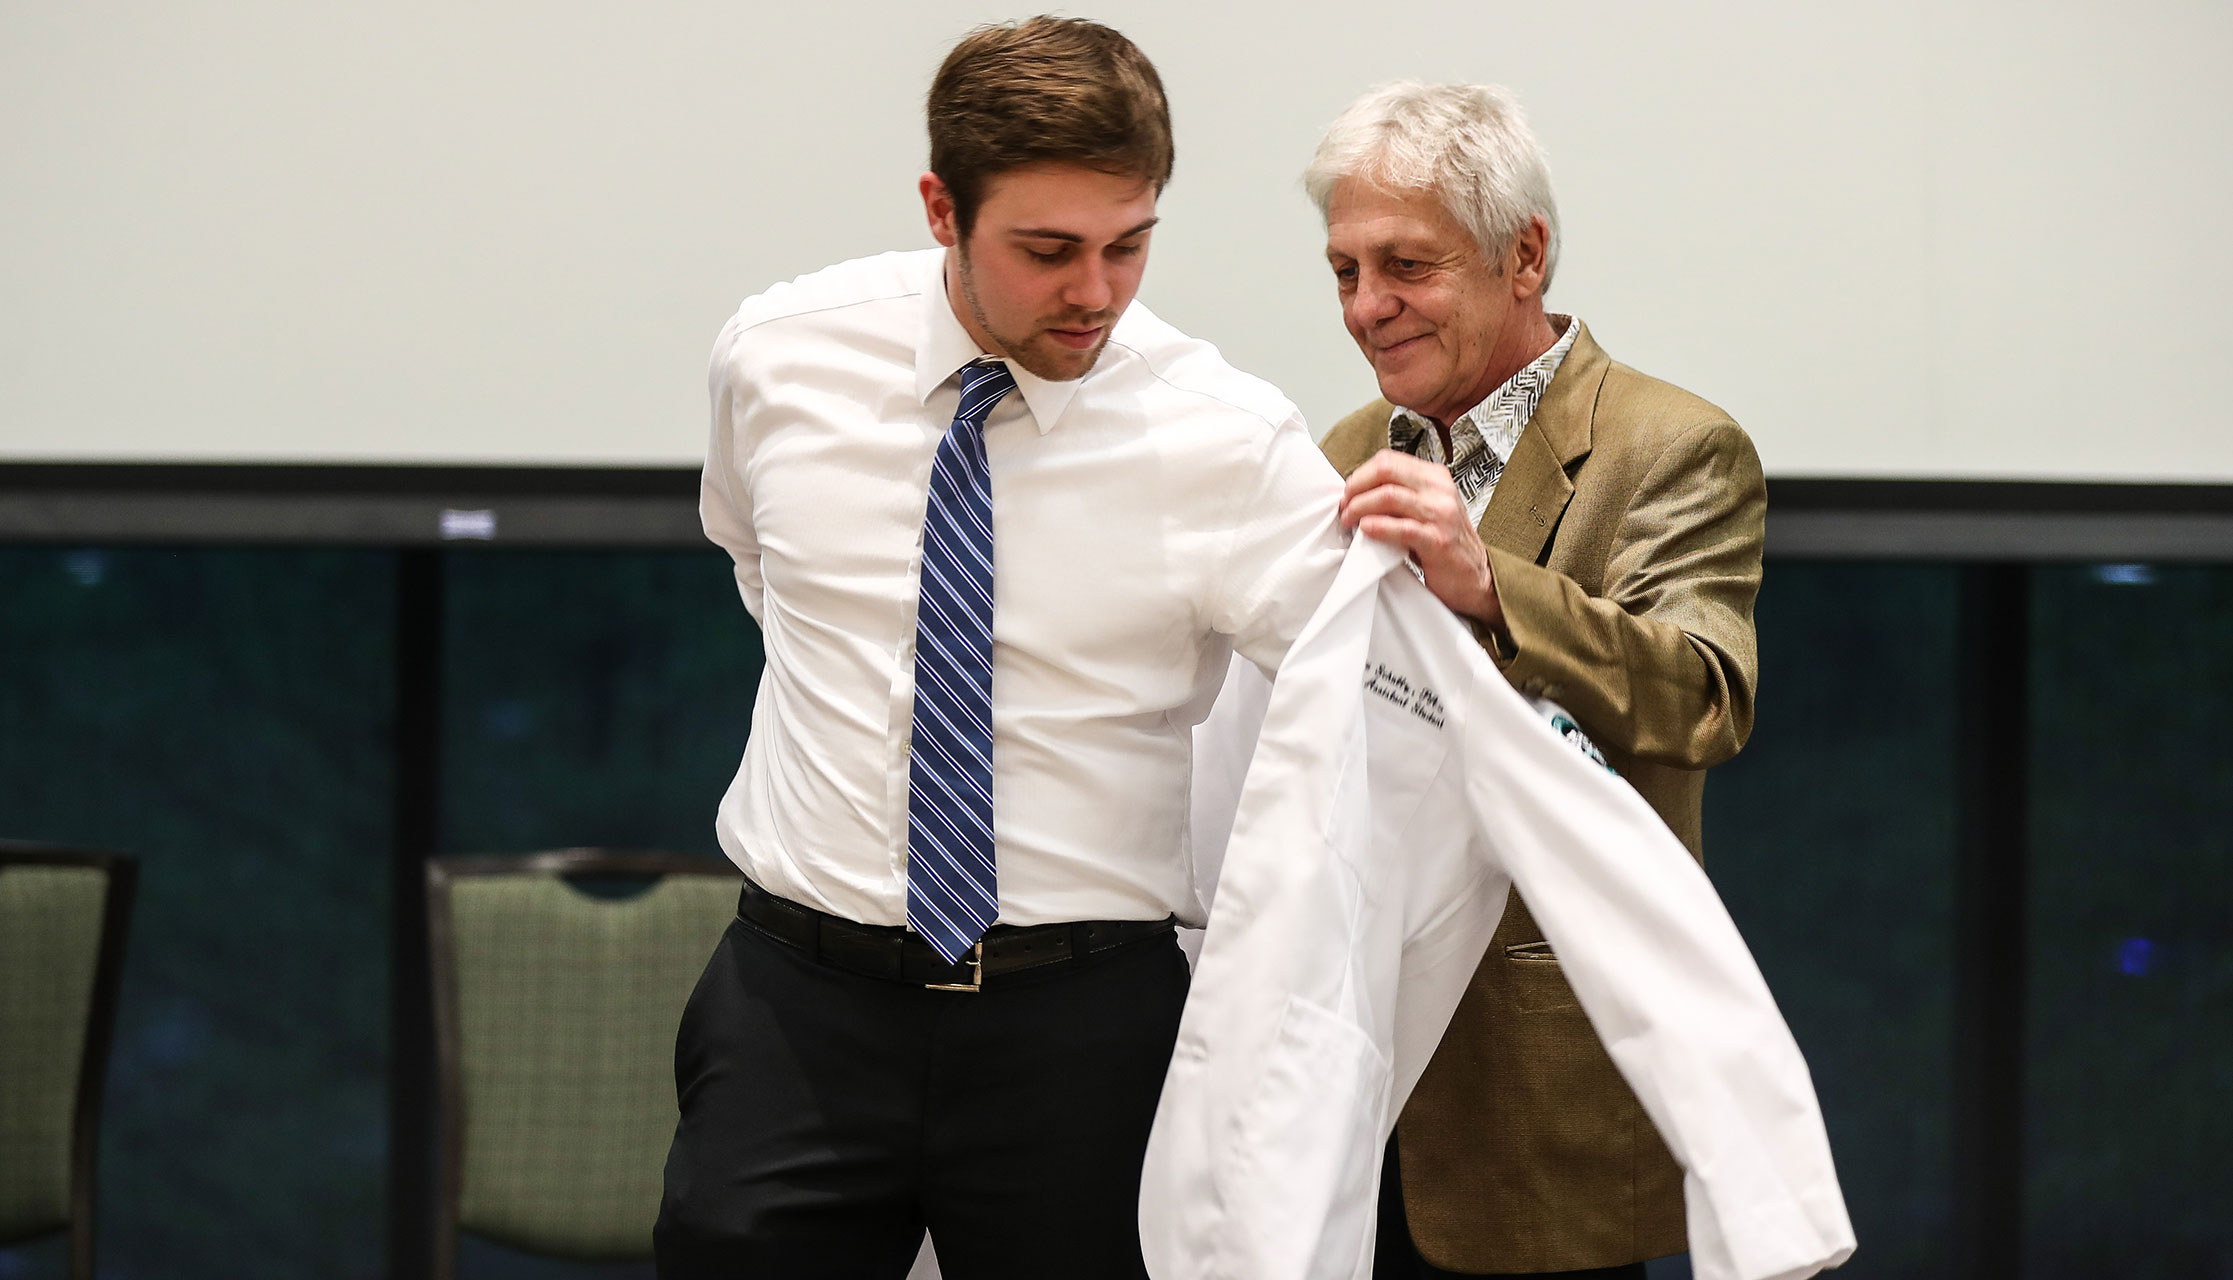 man receivers her white coat